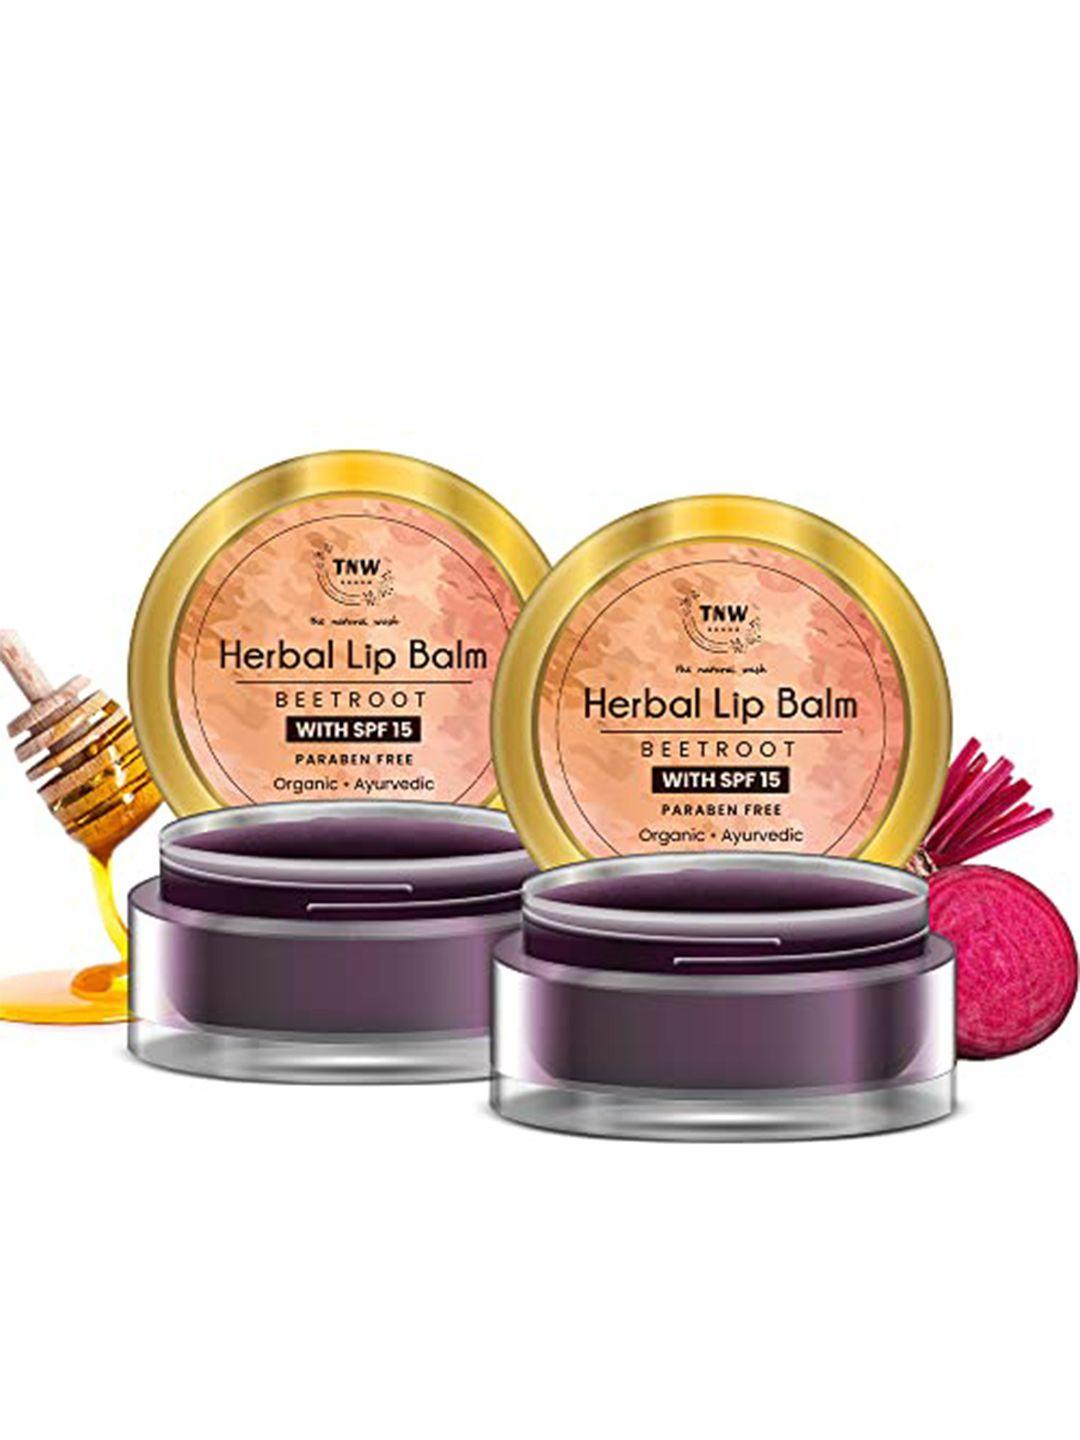 tnw the natural wash set of 2 herbal beetroot spf 15 lip balm 10g